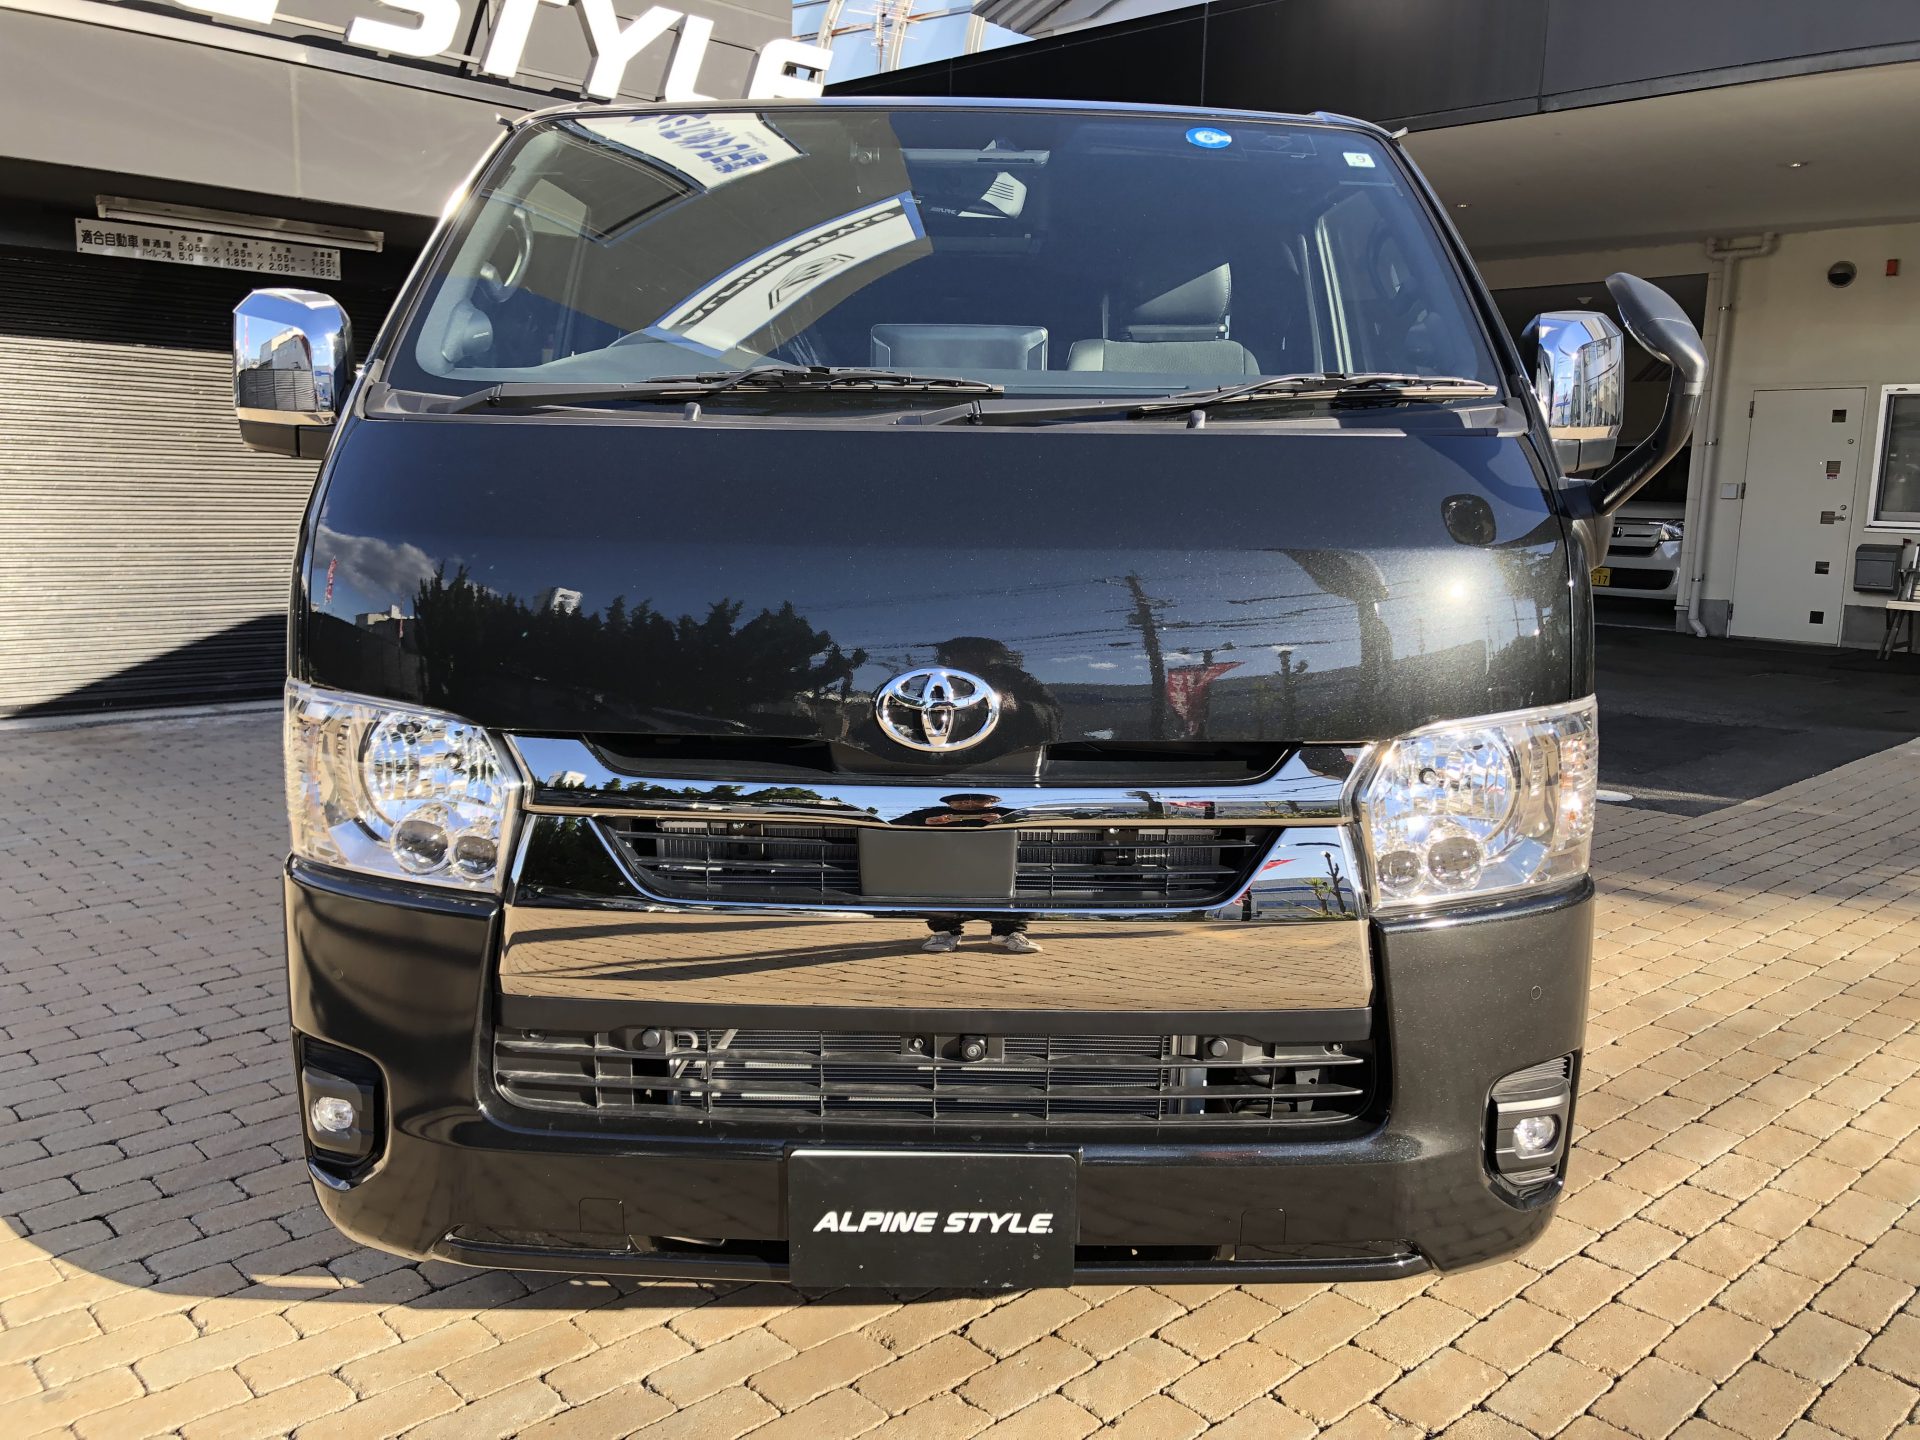 <strong>HIACE SUPER-GL DARKPRIMEⅡ</strong>